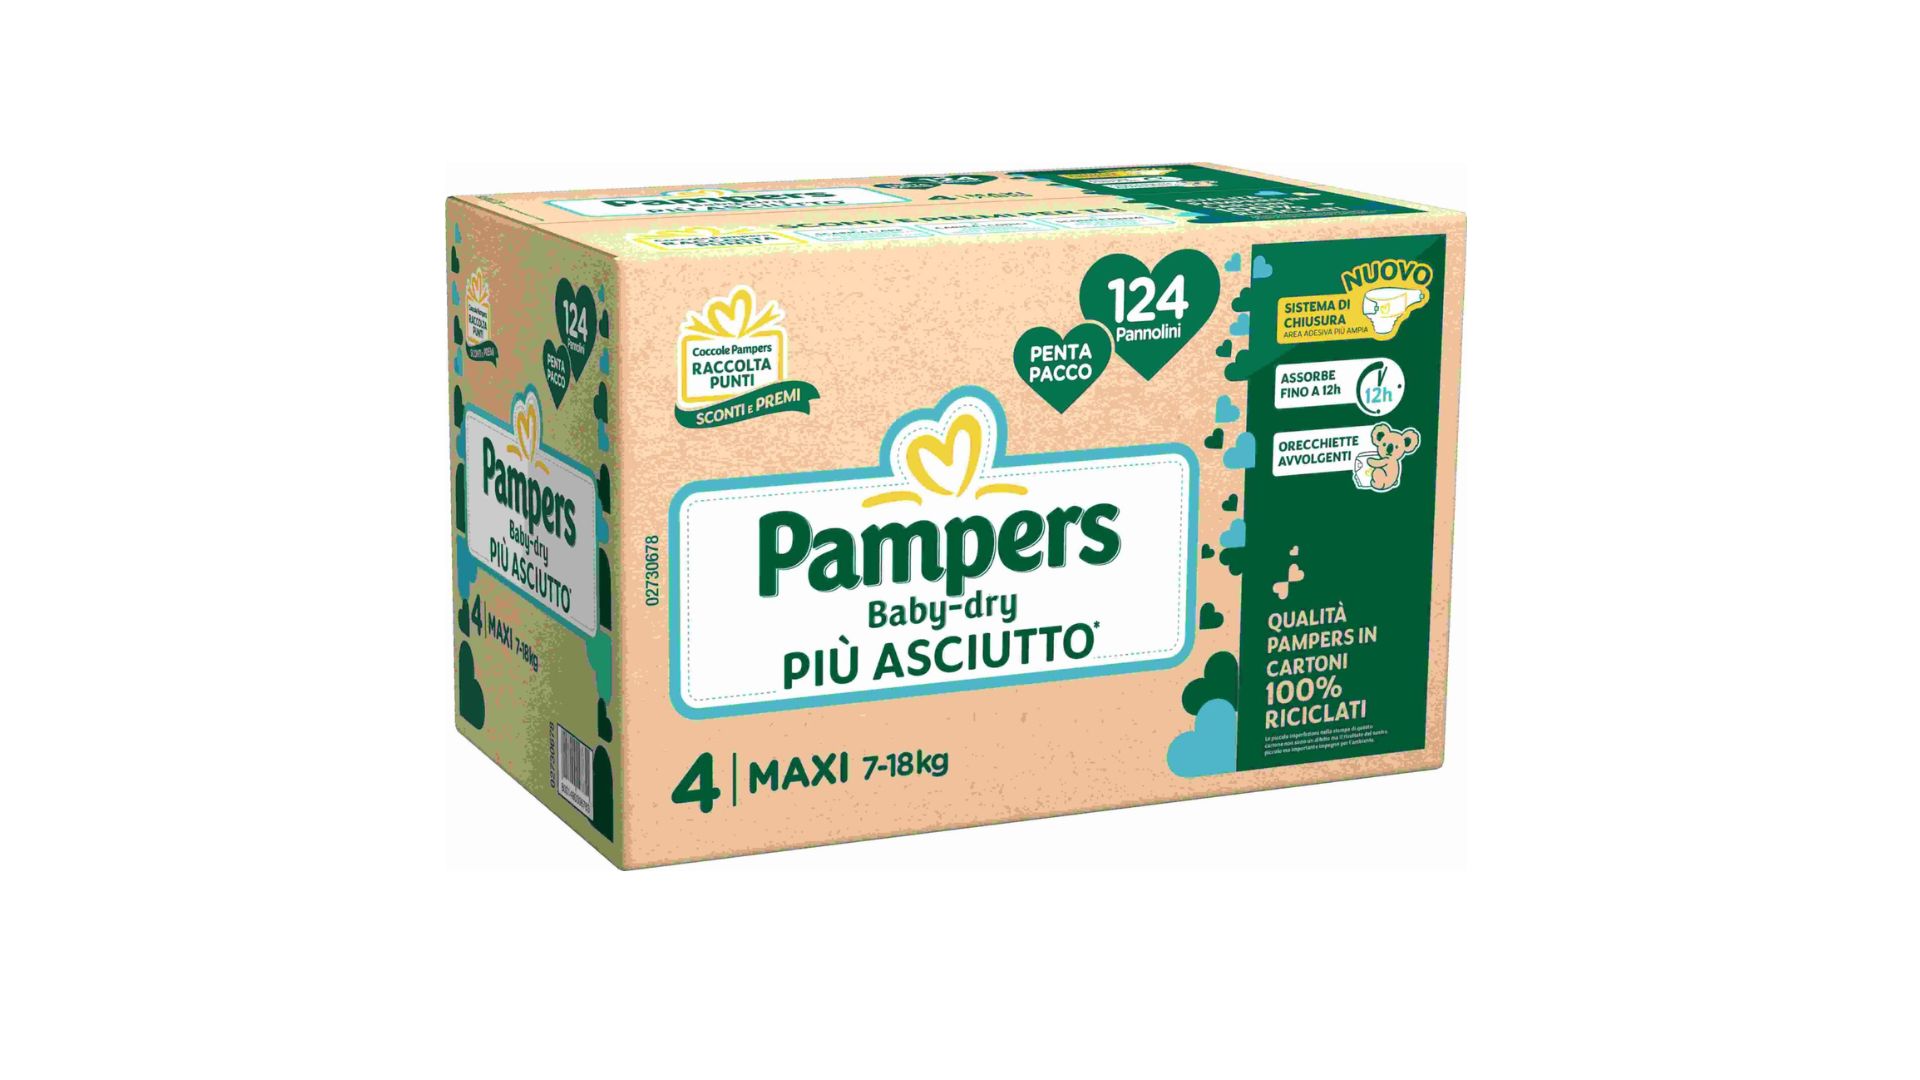 Pampers baby-dry penta maxi 124 pz - Pampers